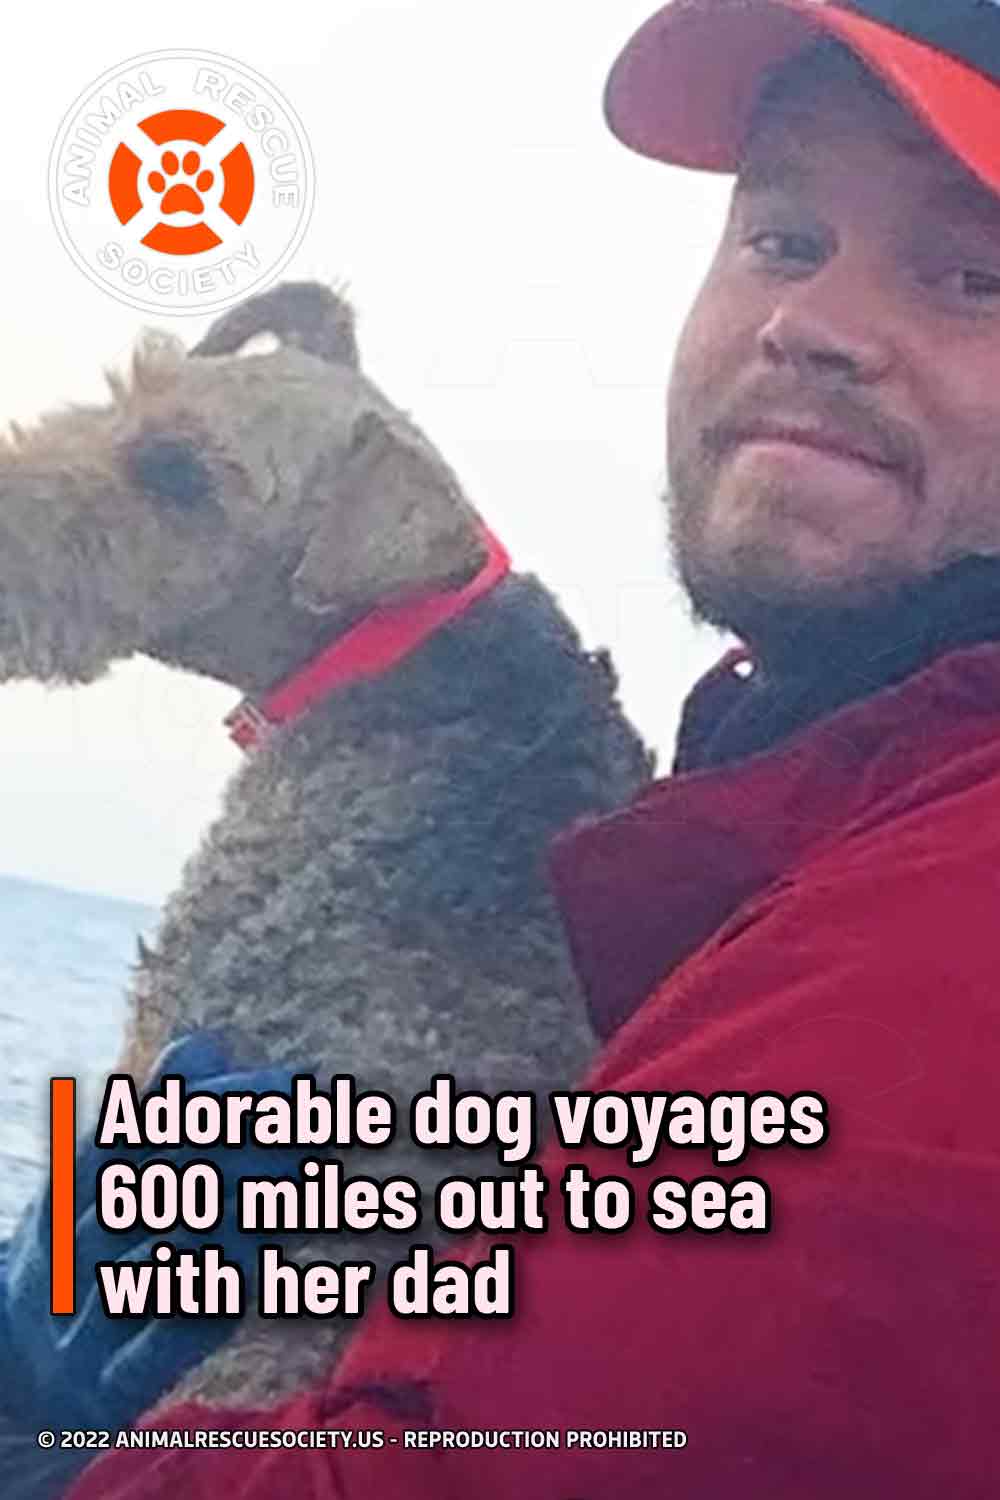 Adorable dog voyages 600 miles out to sea with her dad